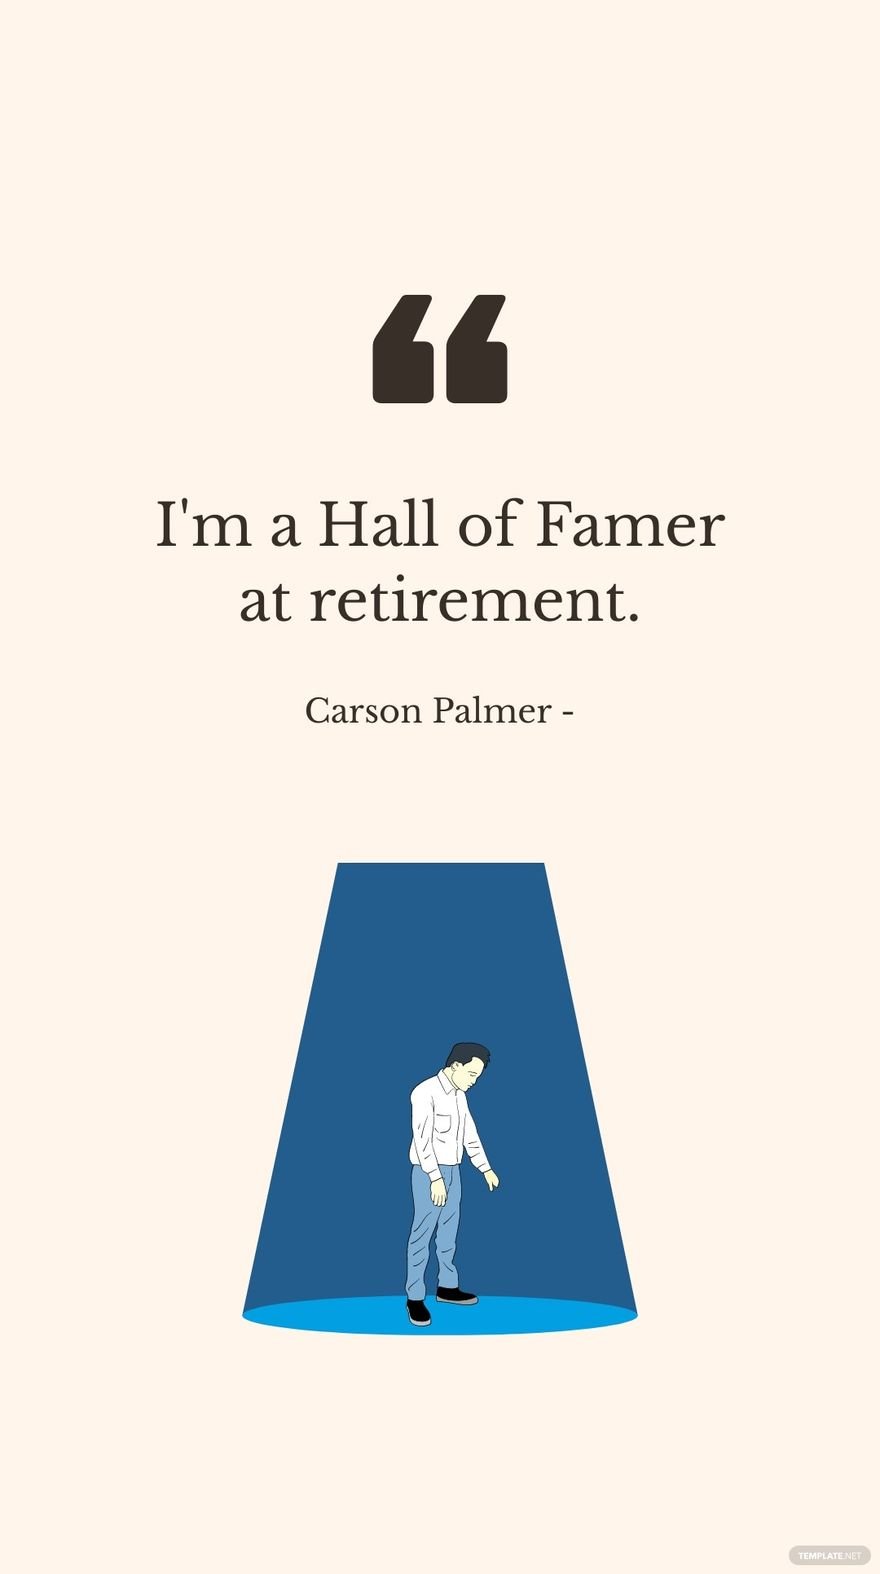 Carson Palmer - I'm a Hall of Famer at retirement. in JPG